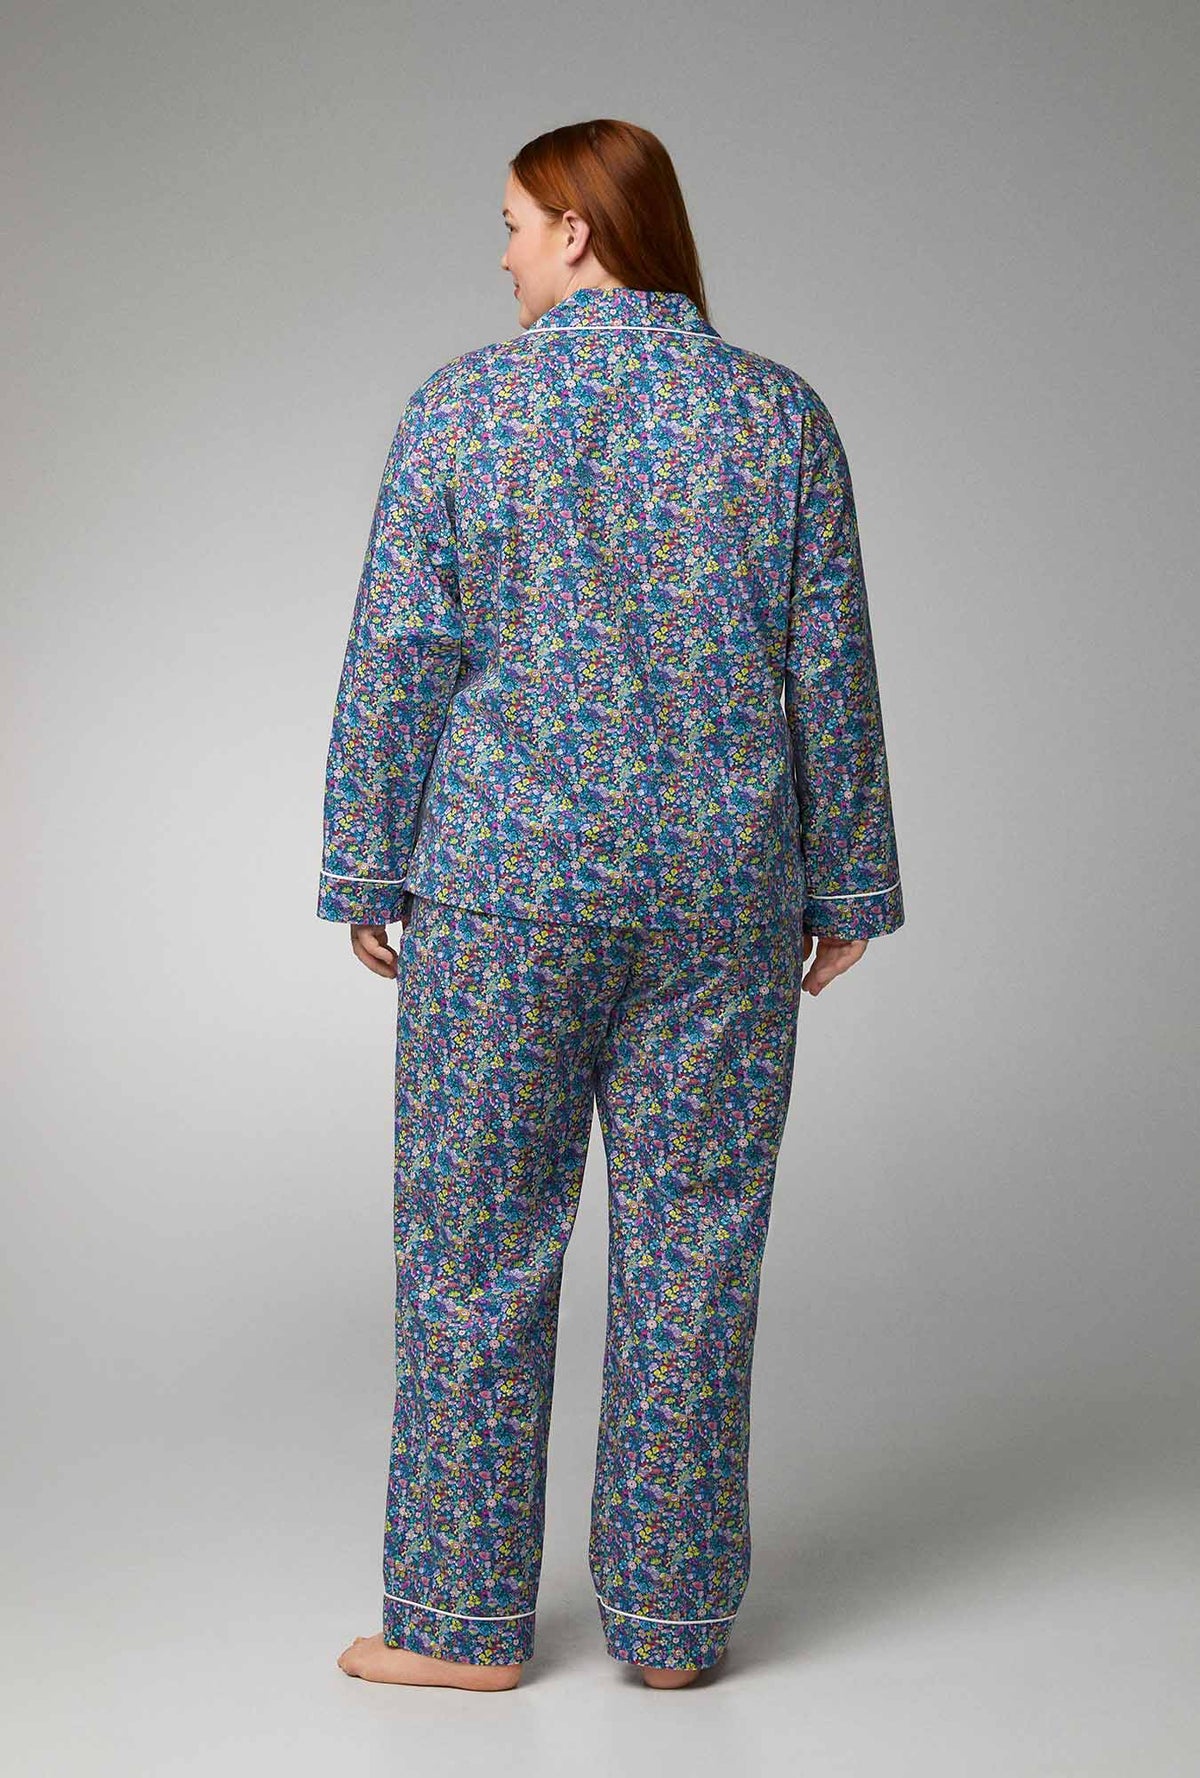 A lady wearing long sleeve classic cotton pj set with classic garden print